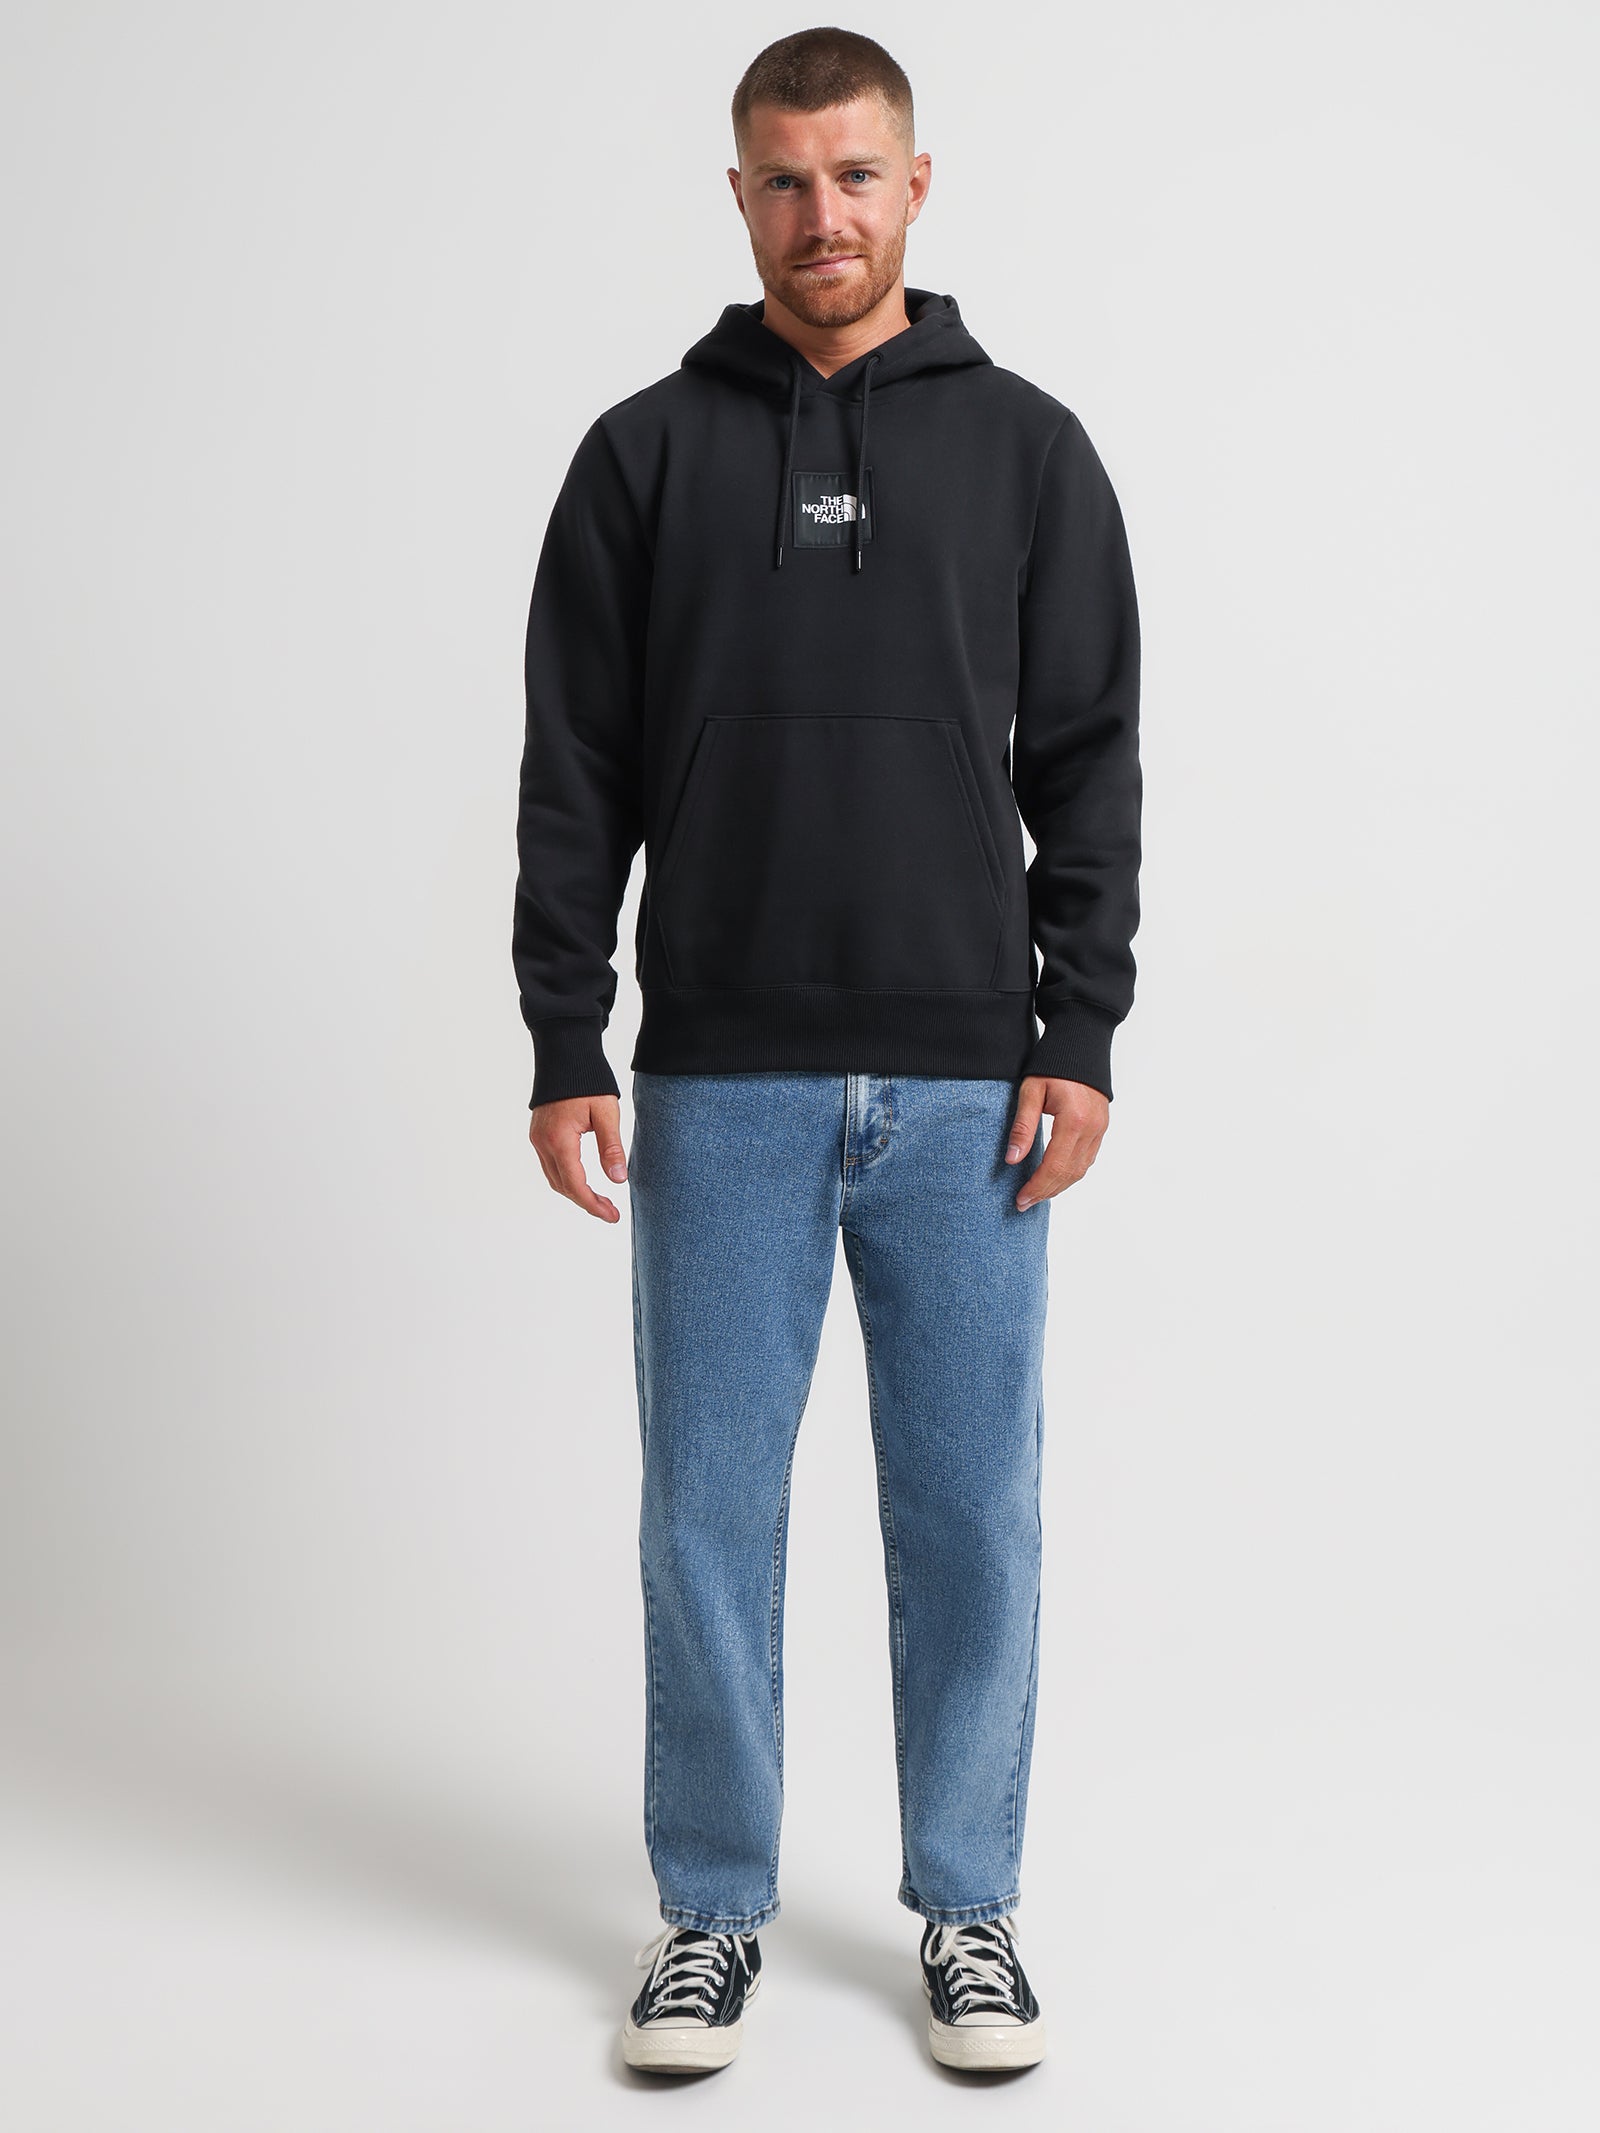 The North Face Heavyweight Box Logo hoodie in black